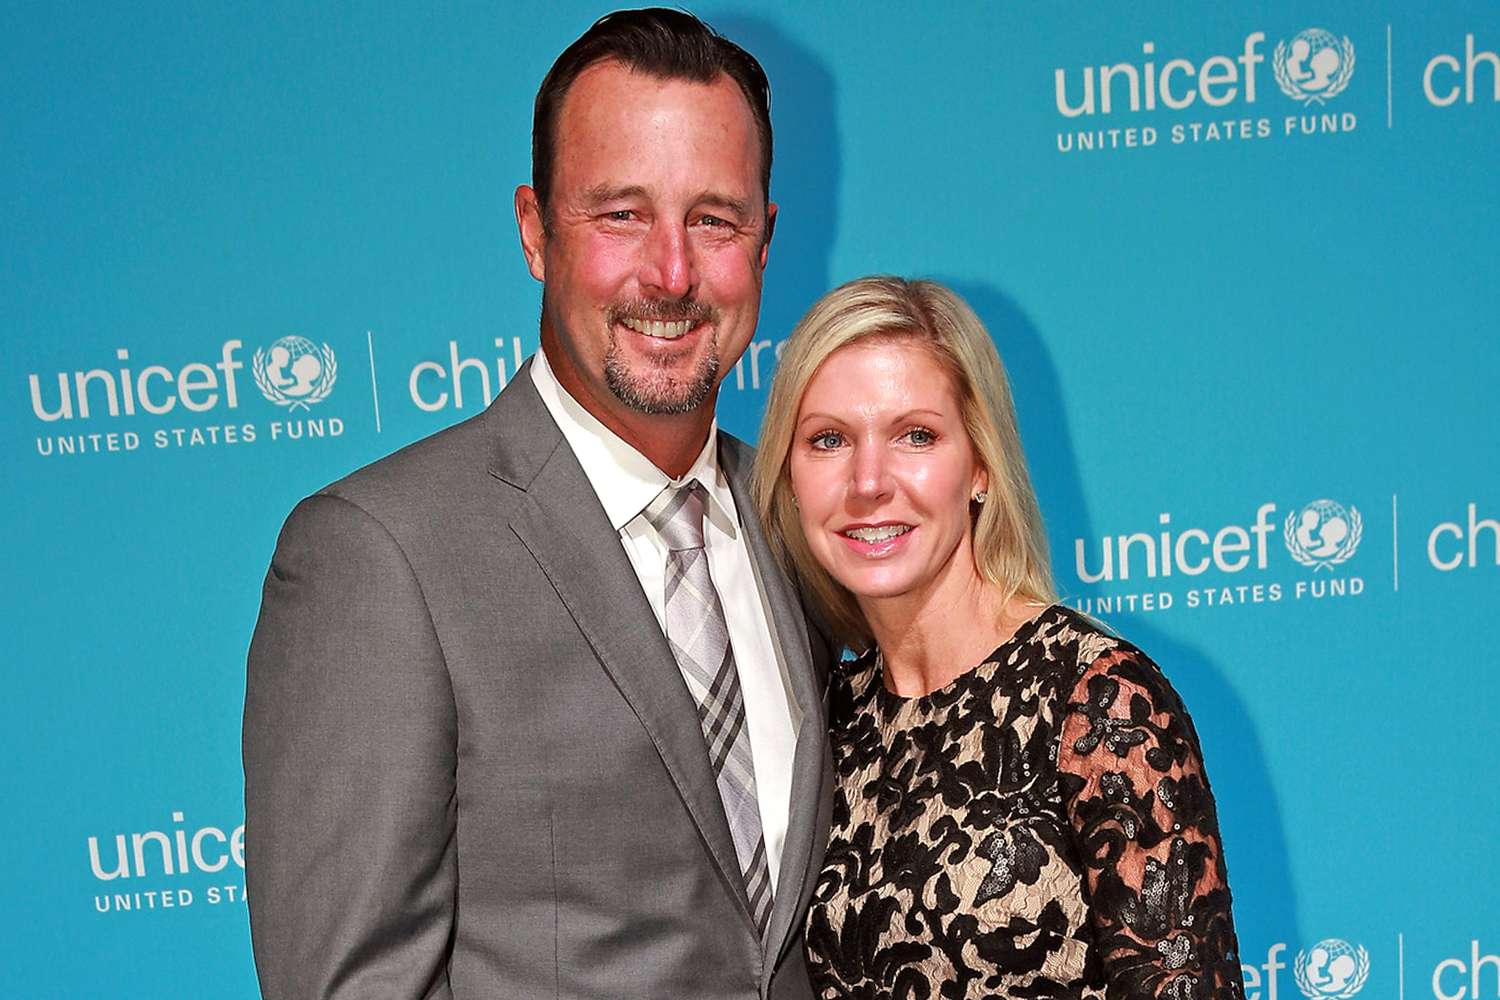 Tim Wakefield and his wife Stacy dead tout 022824 63dd305dc9f046df922eae22ee3d94f9